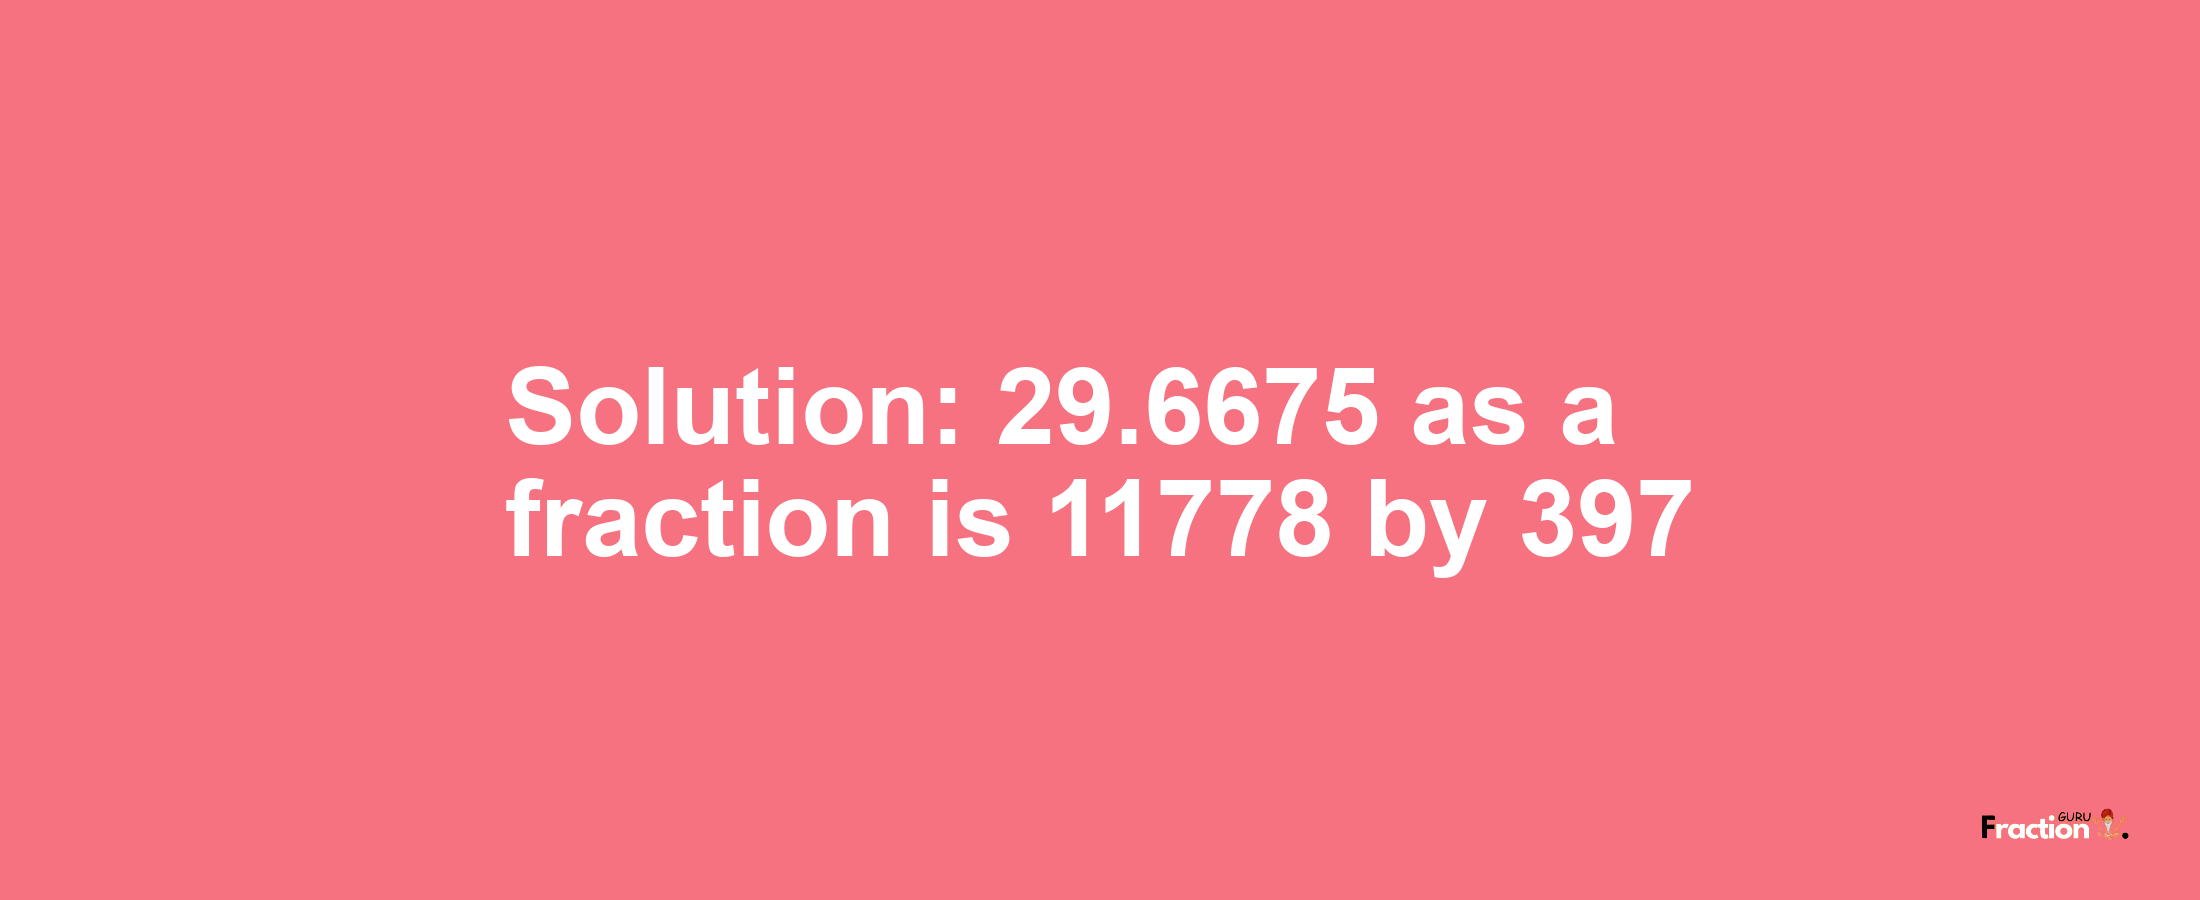 Solution:29.6675 as a fraction is 11778/397